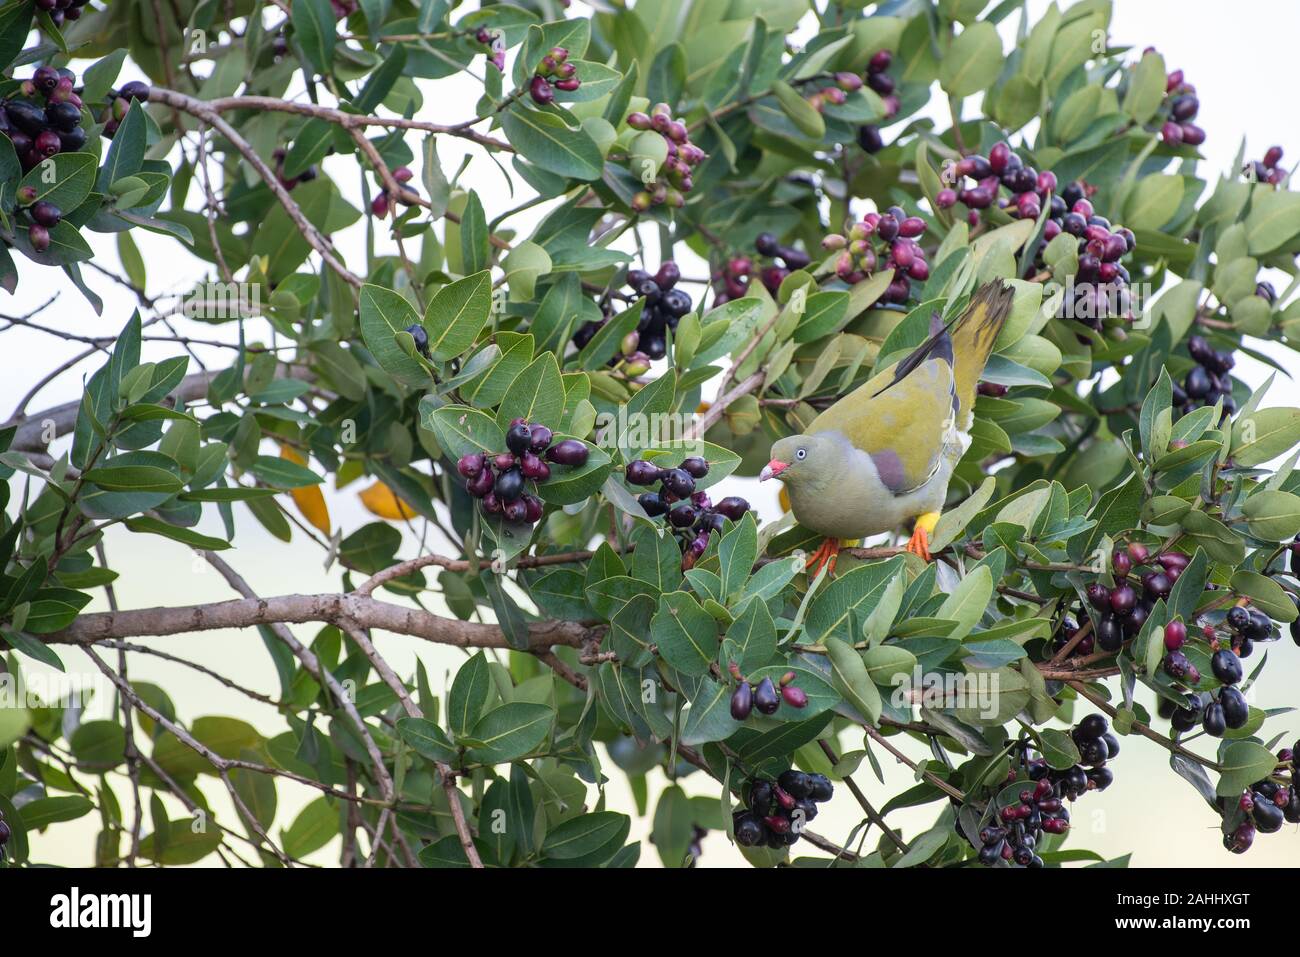 An African Green Pigeon - Treron calvus - sits in a waterberry tree - Syzgium cordatum - laden with ripe berries Stock Photo